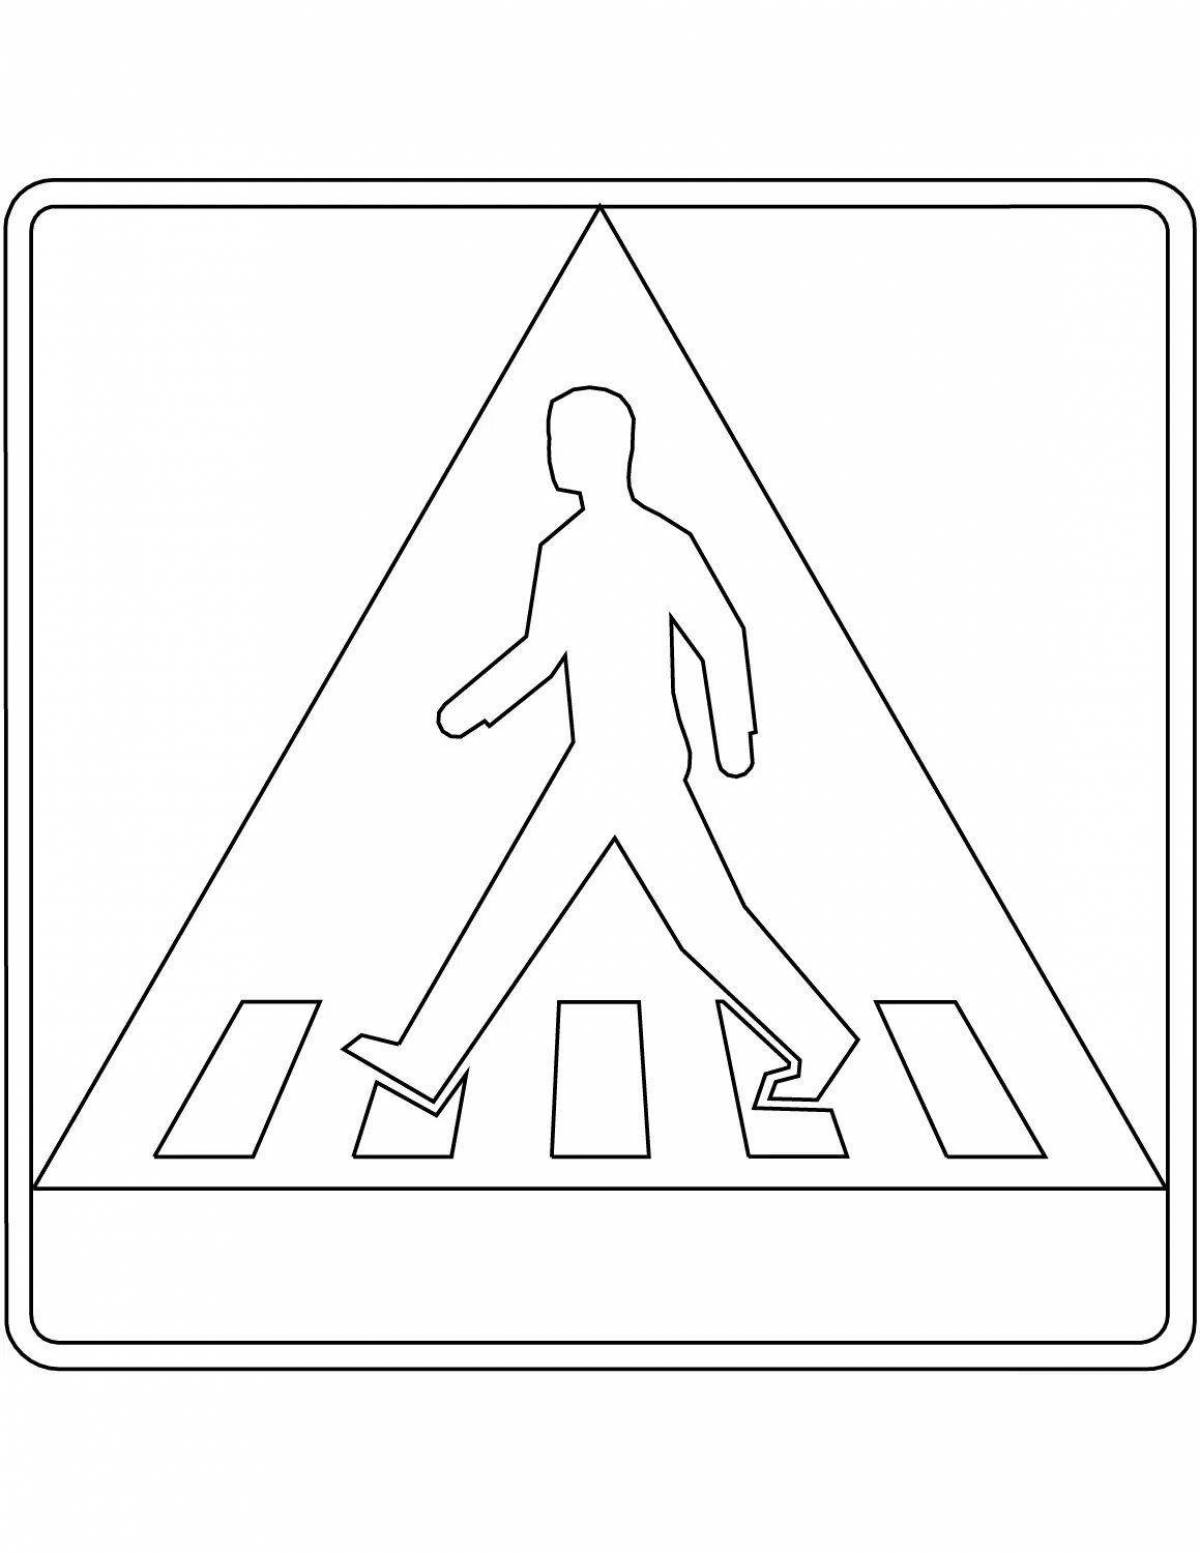 Playful Primary School Traffic Signs Coloring Page